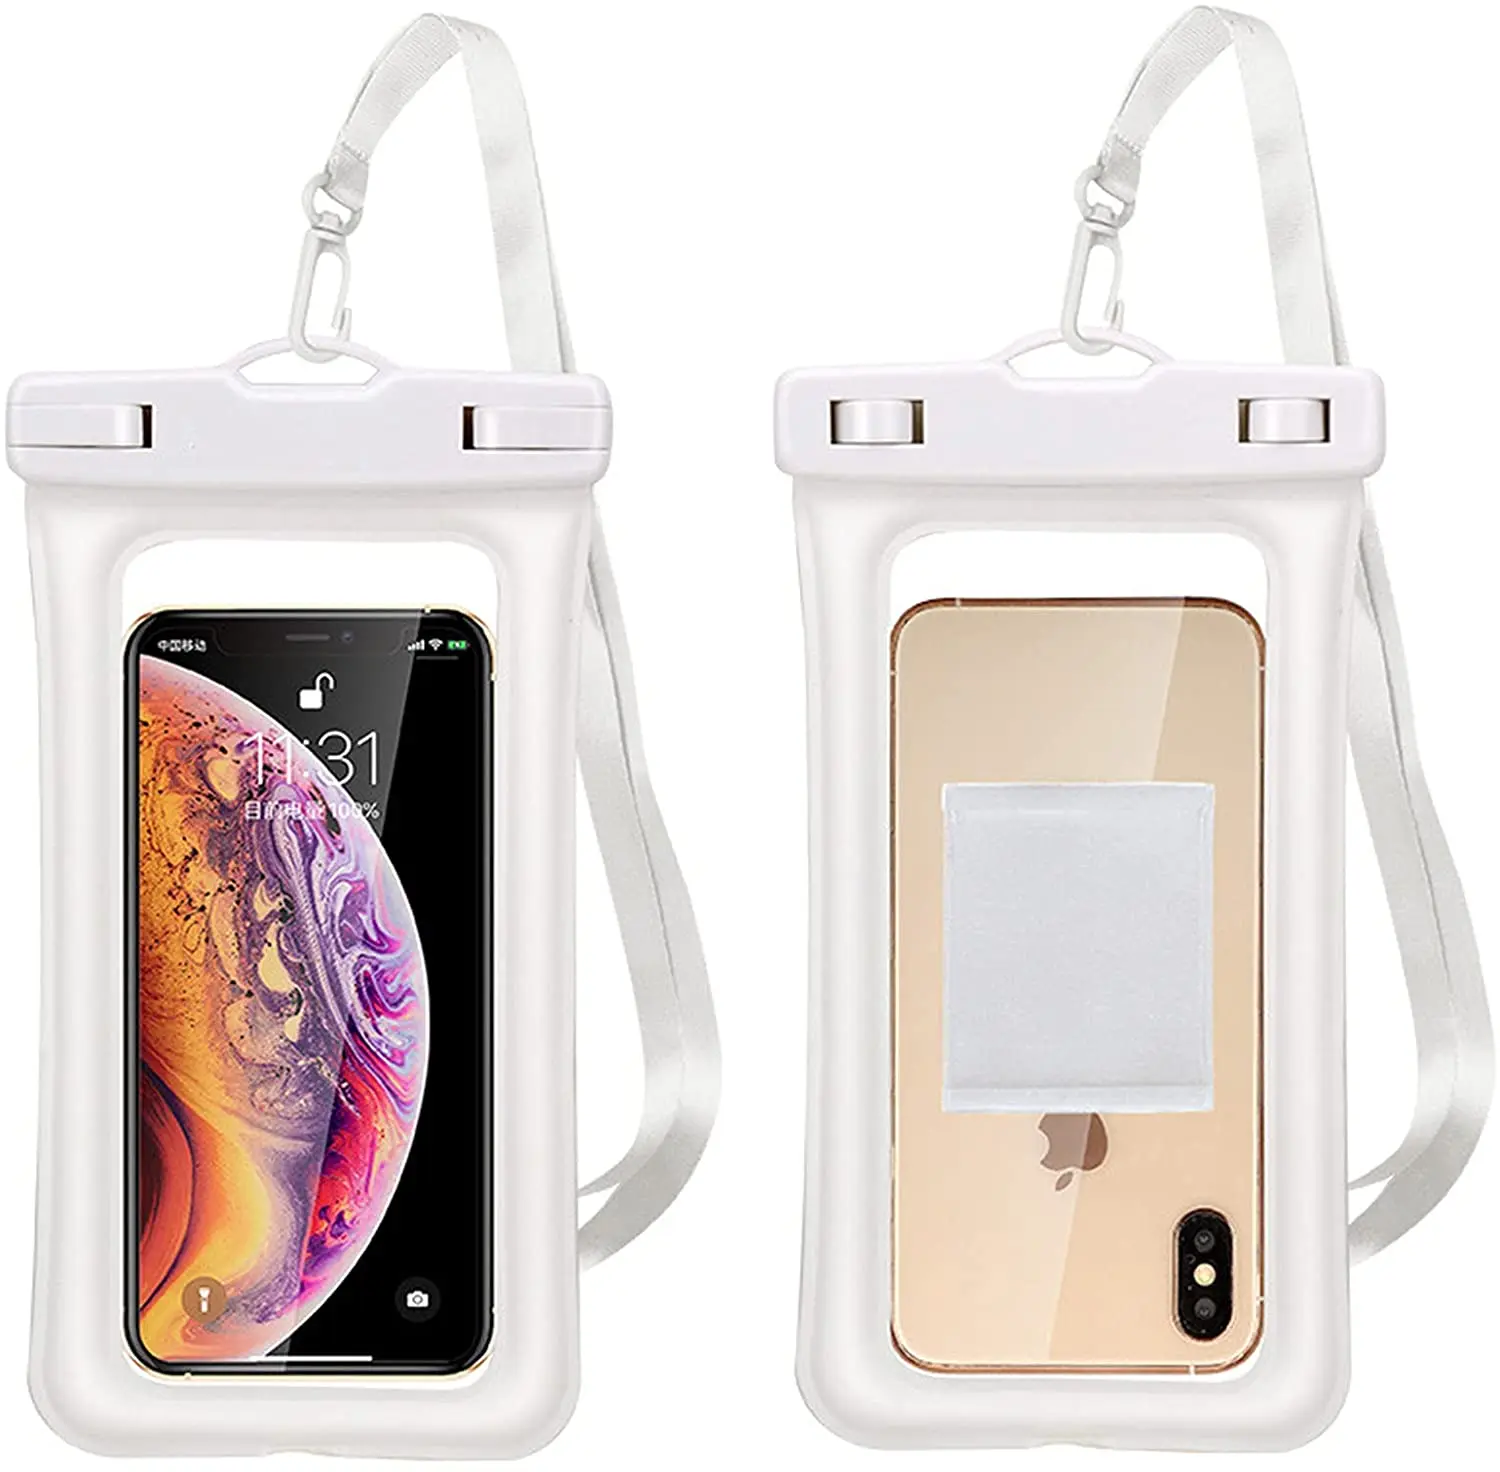 2 colors Top quality Mobile Phone Pouch 20M Waterproof Bag Underwater Dry Case Cover For snorkeling Canoe Swimming Drifting